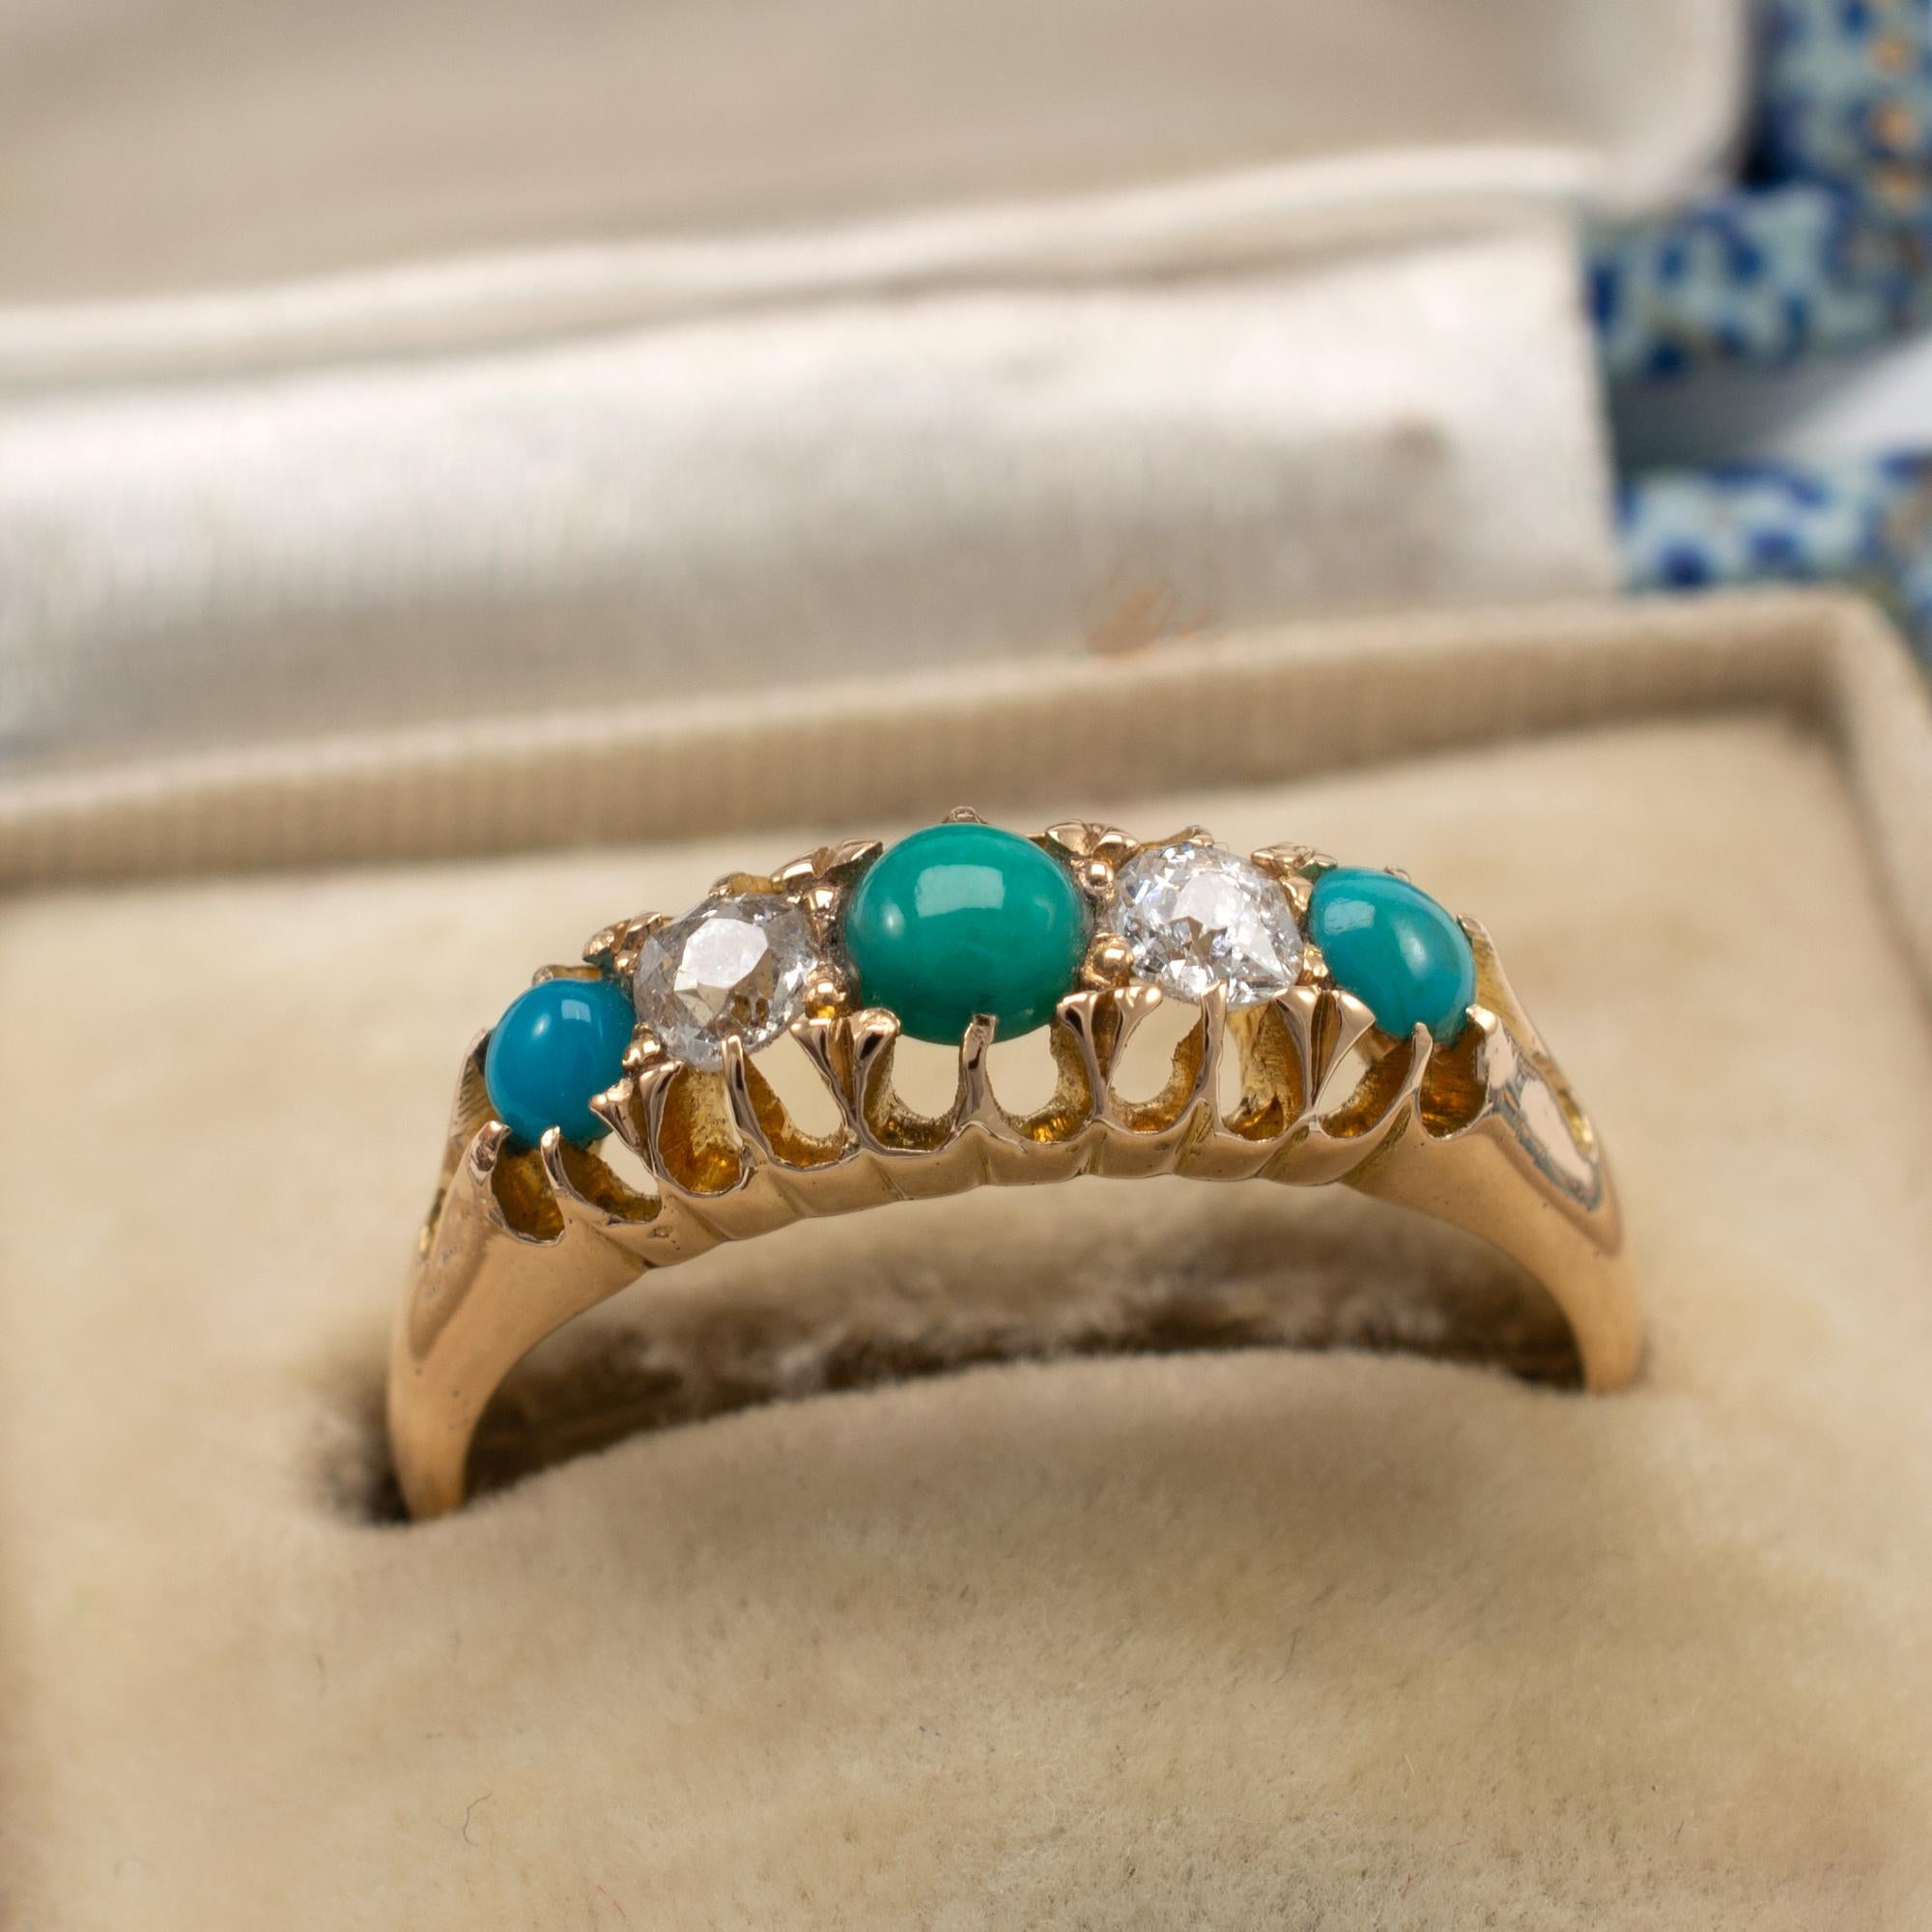 Antique Turquoise and Diamond Boat Shape Ring 18 Karat Yellow Gold, Dated 1893 1